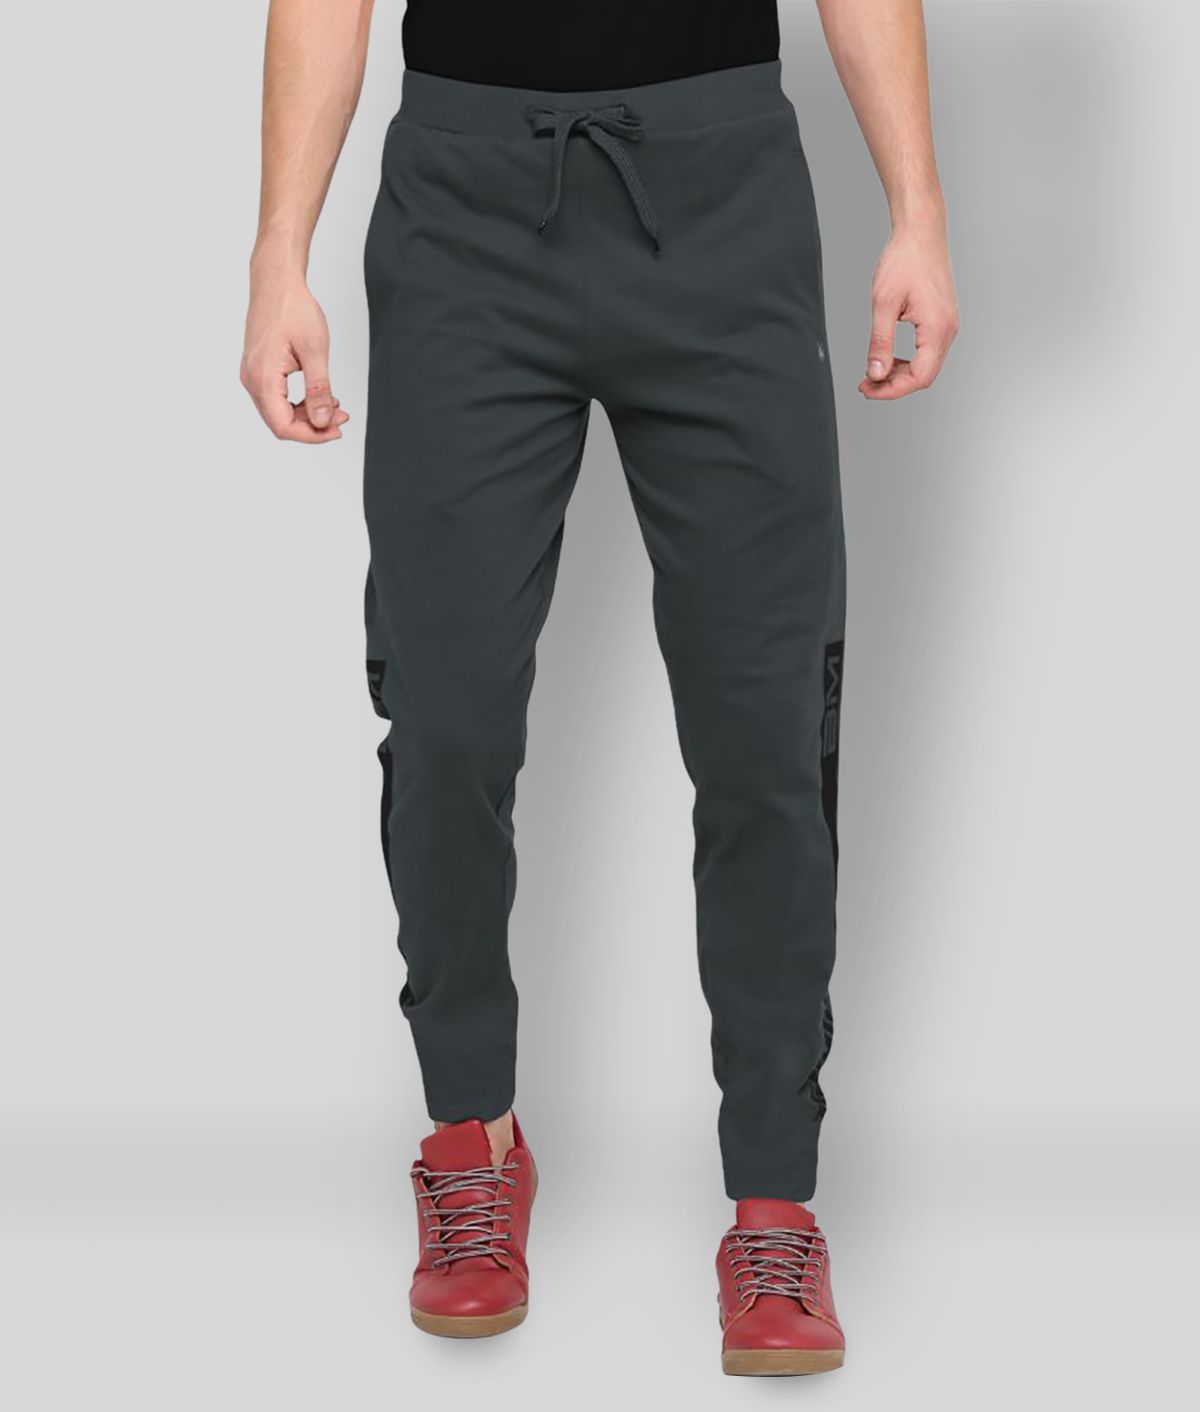 BULLMER - Grey Polyester Men's Trackpants ( Pack of 1 )